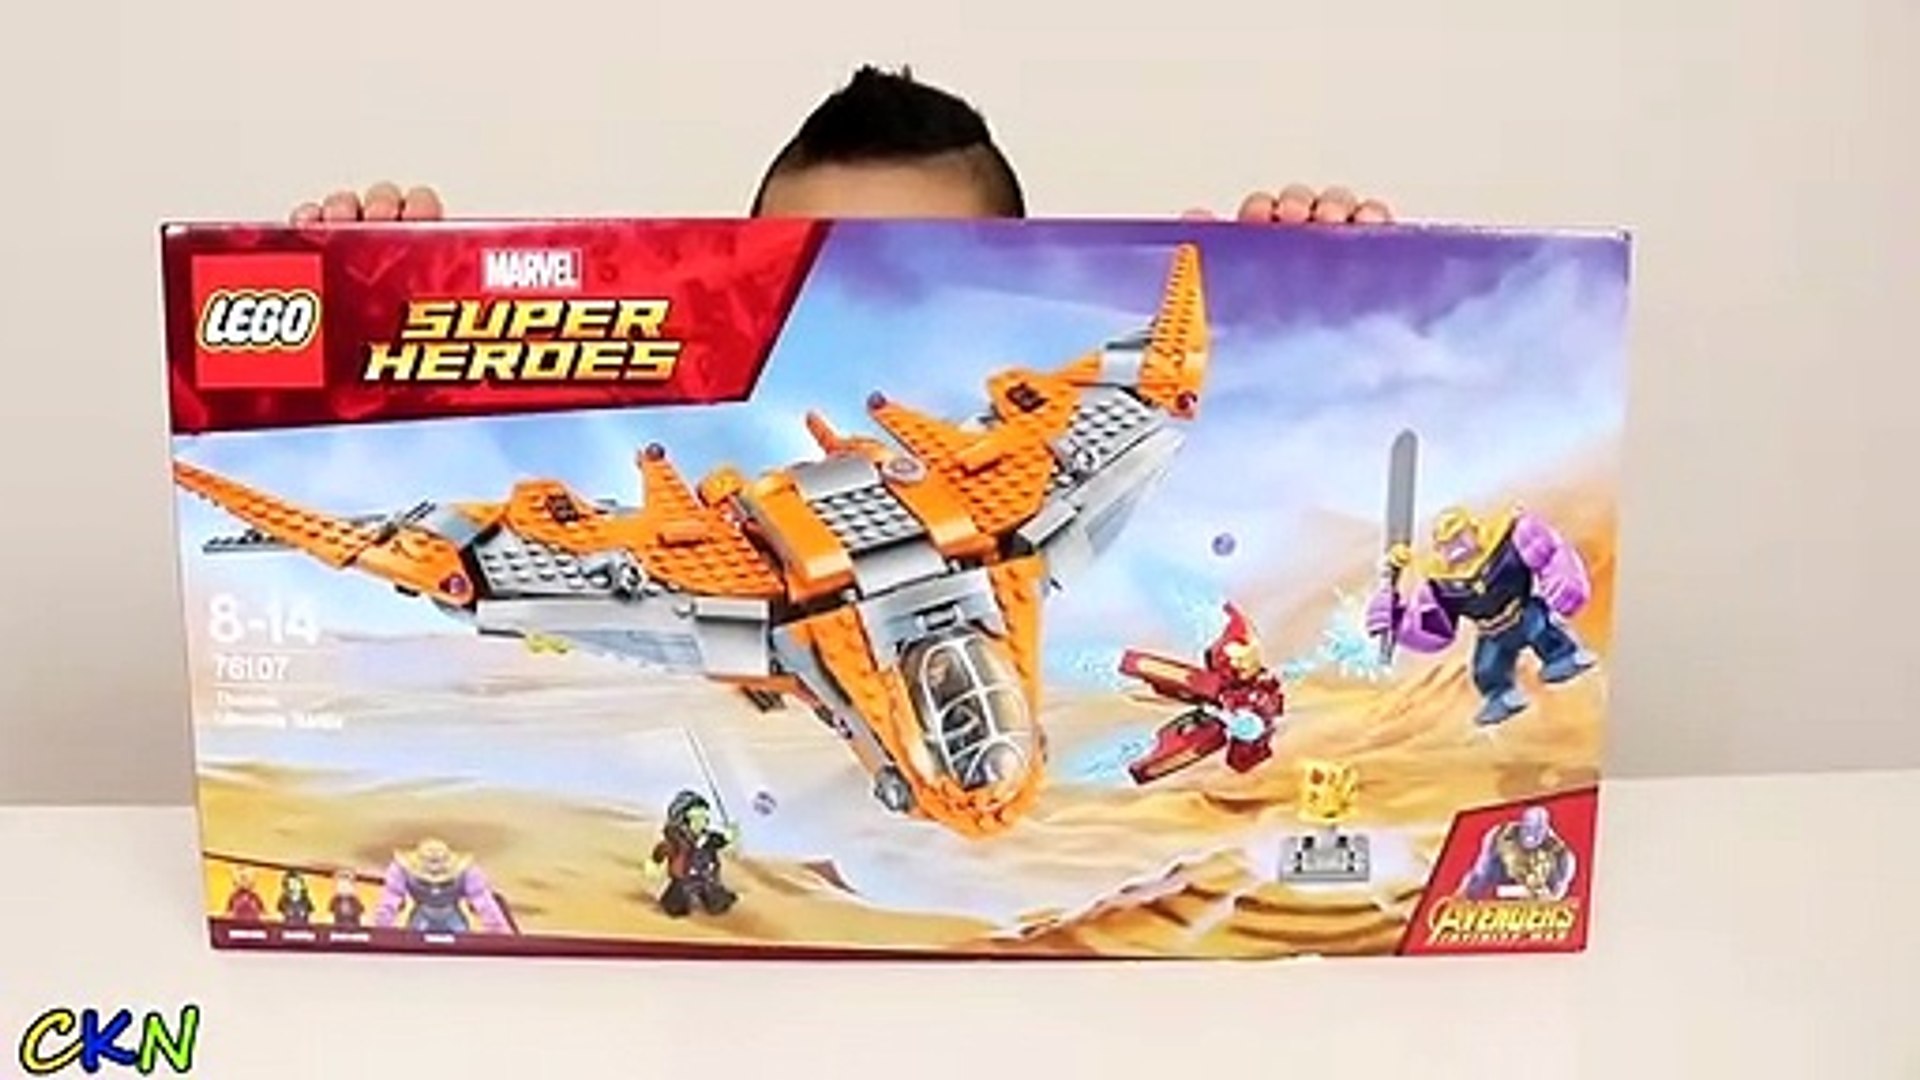 5 Lego Avengers Infinity War Sets Thanos Battle For Infinity Gems Ckn Toys  - video Dailymotion